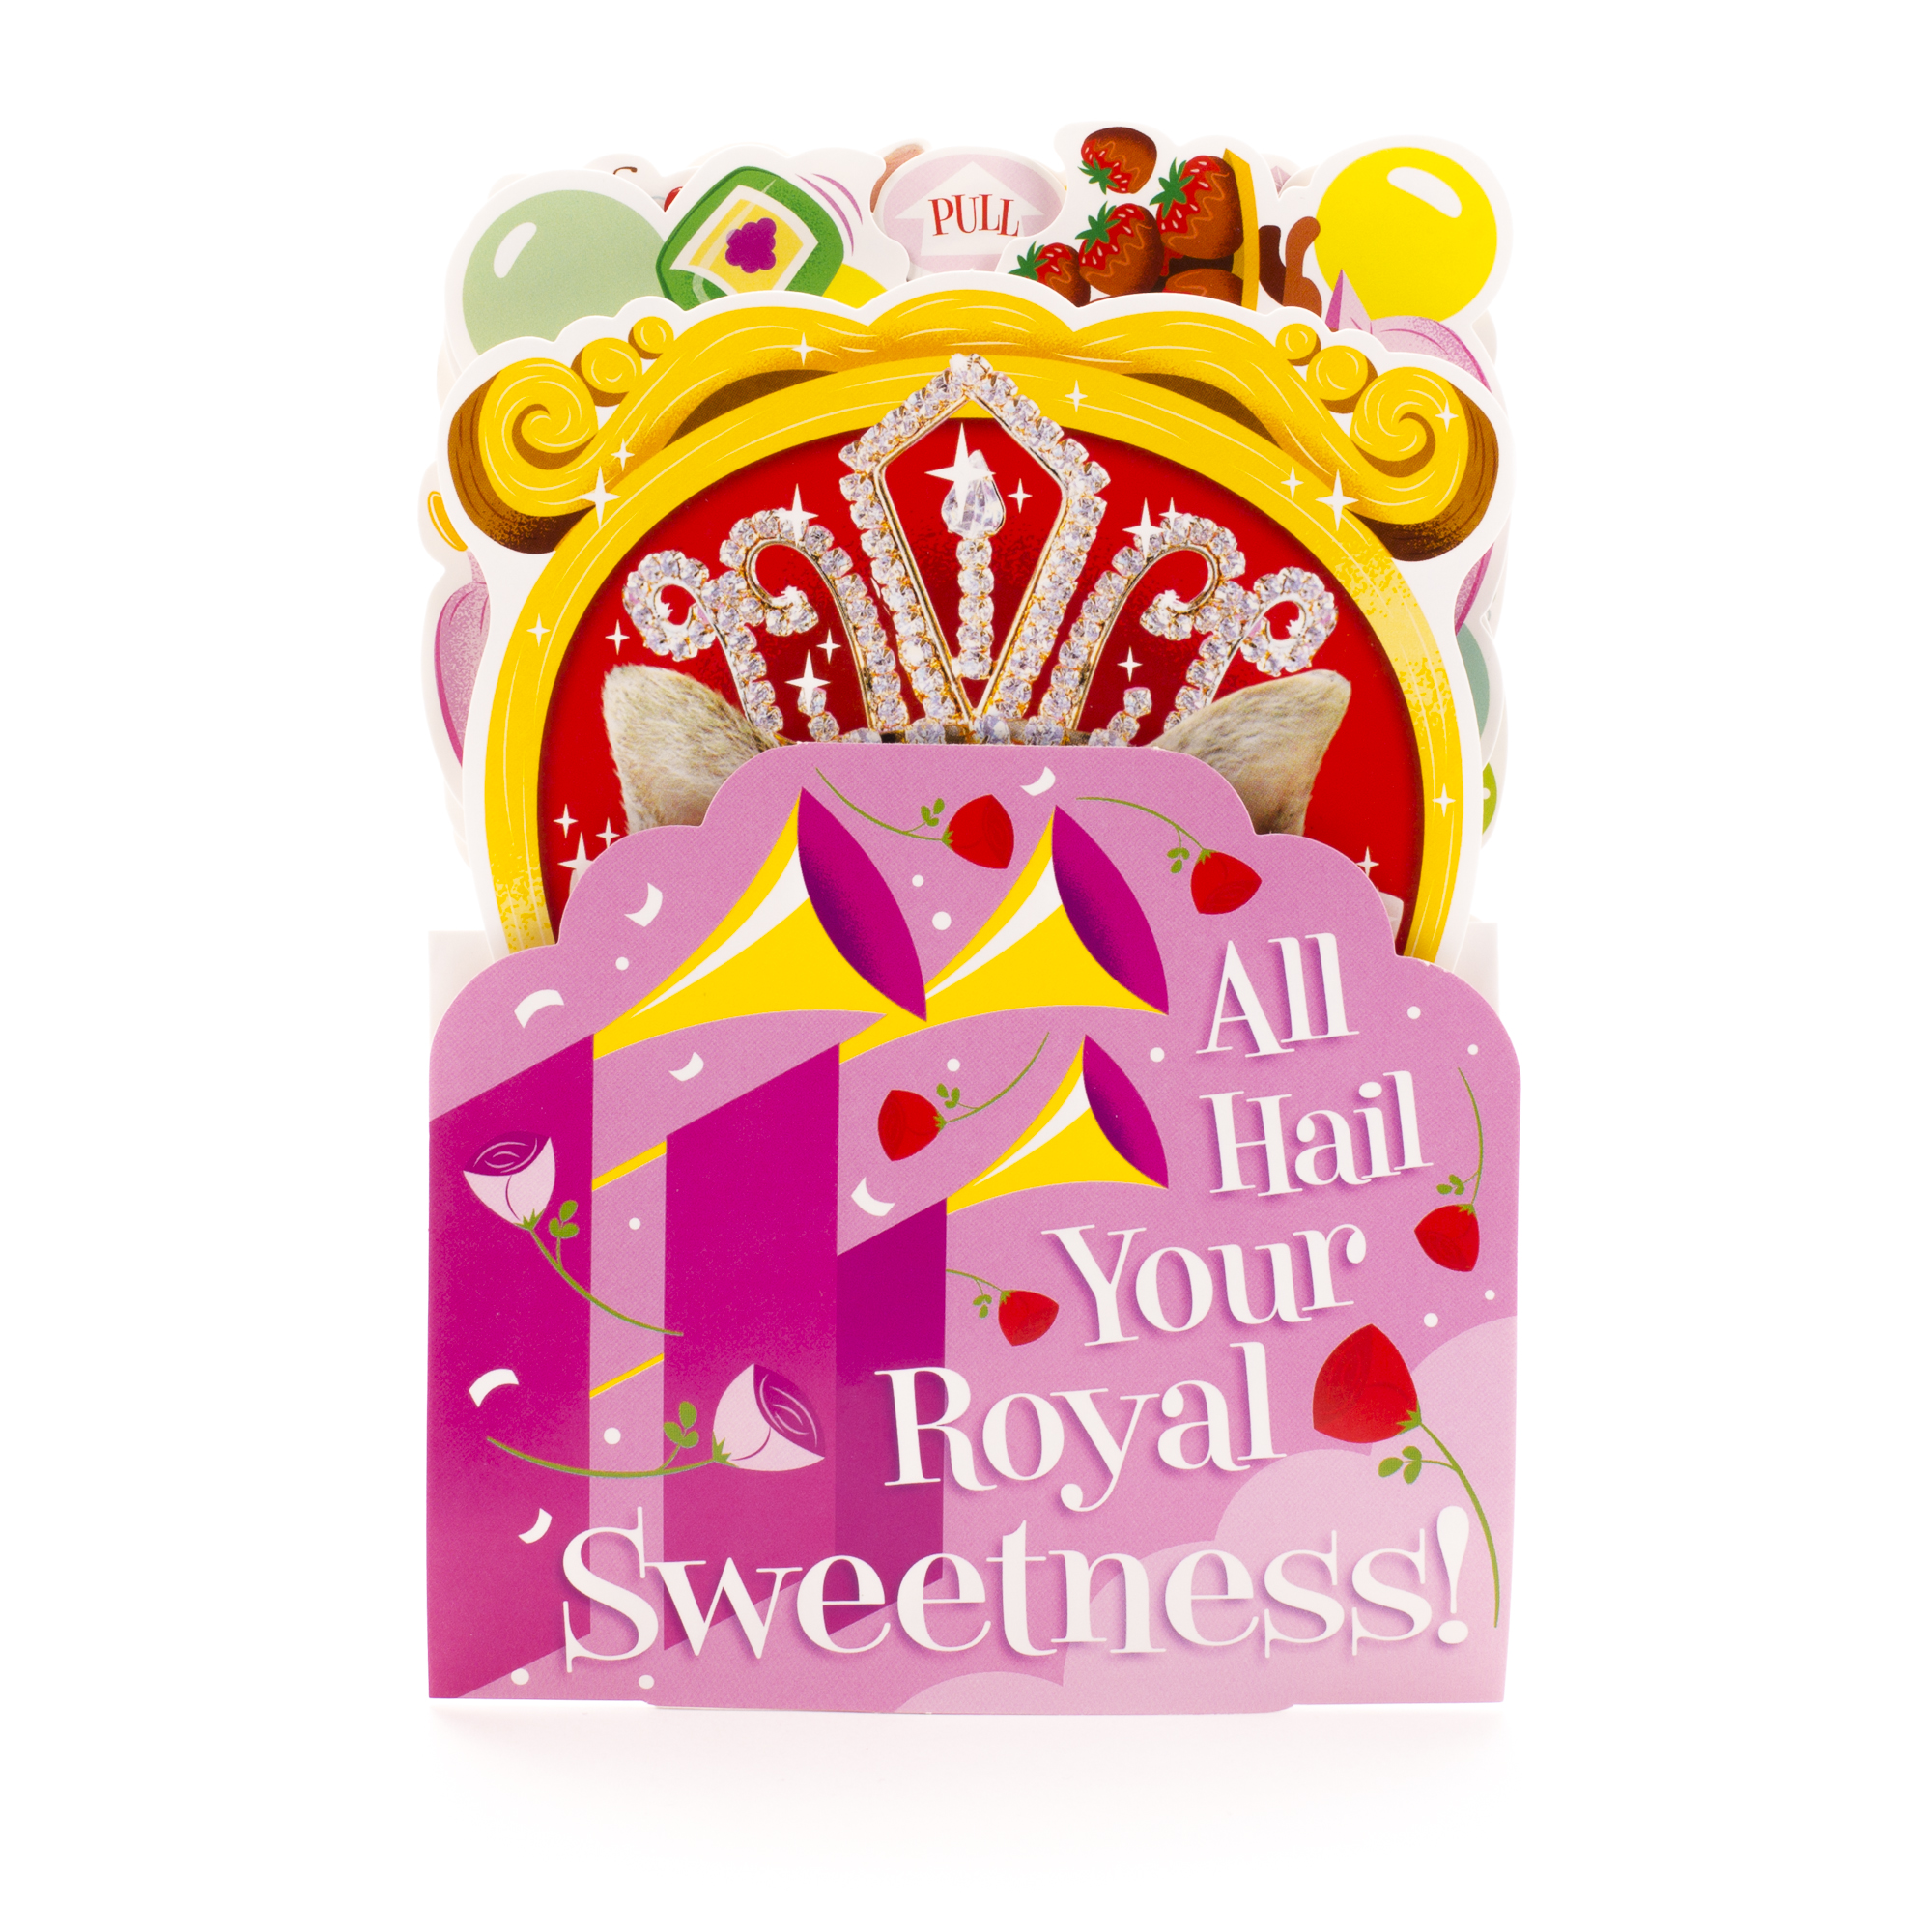 Hallmark Funny Pop Up Mother's Day Card with Song (Cat Queen, Plays Rule Britannia) - image 3 of 7